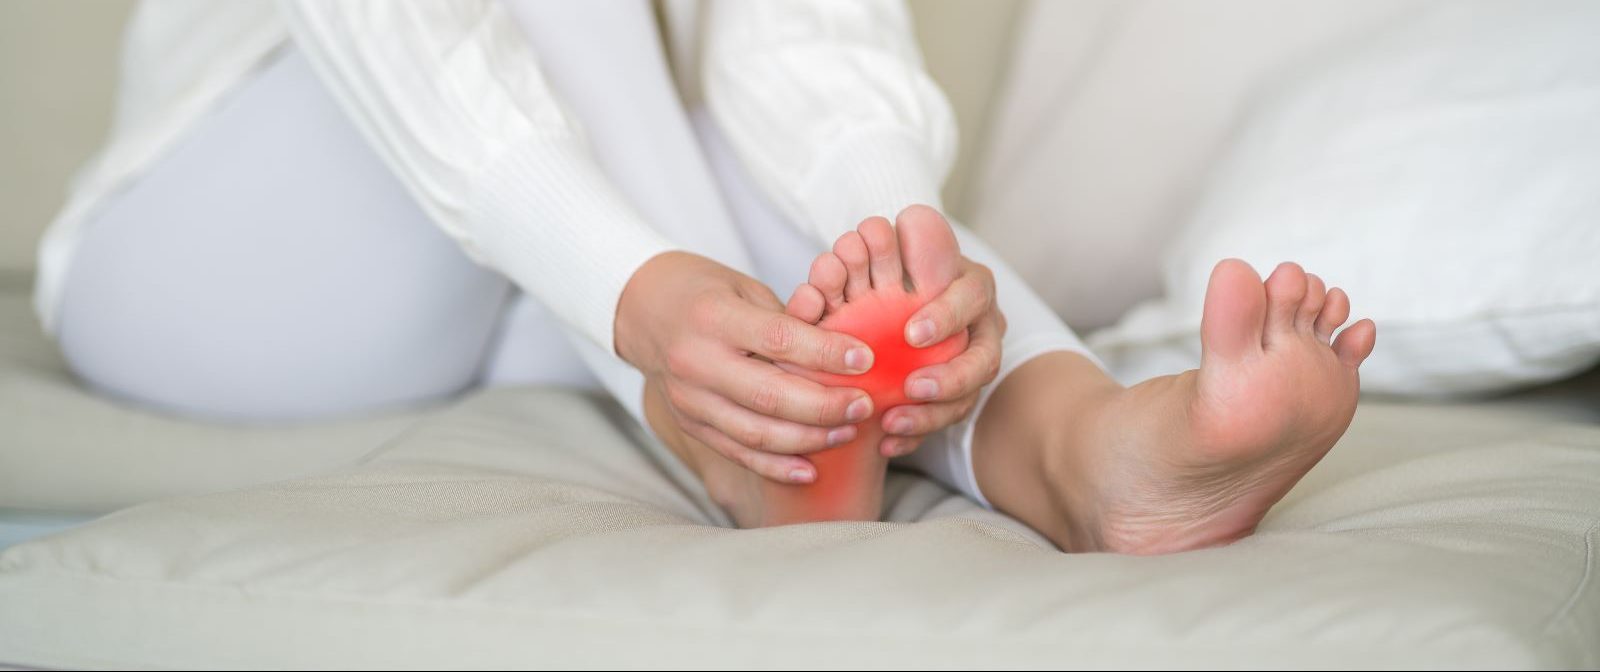 Learn more about the causes, symptoms and possible complications of bunions, and how they can impact your foot health.